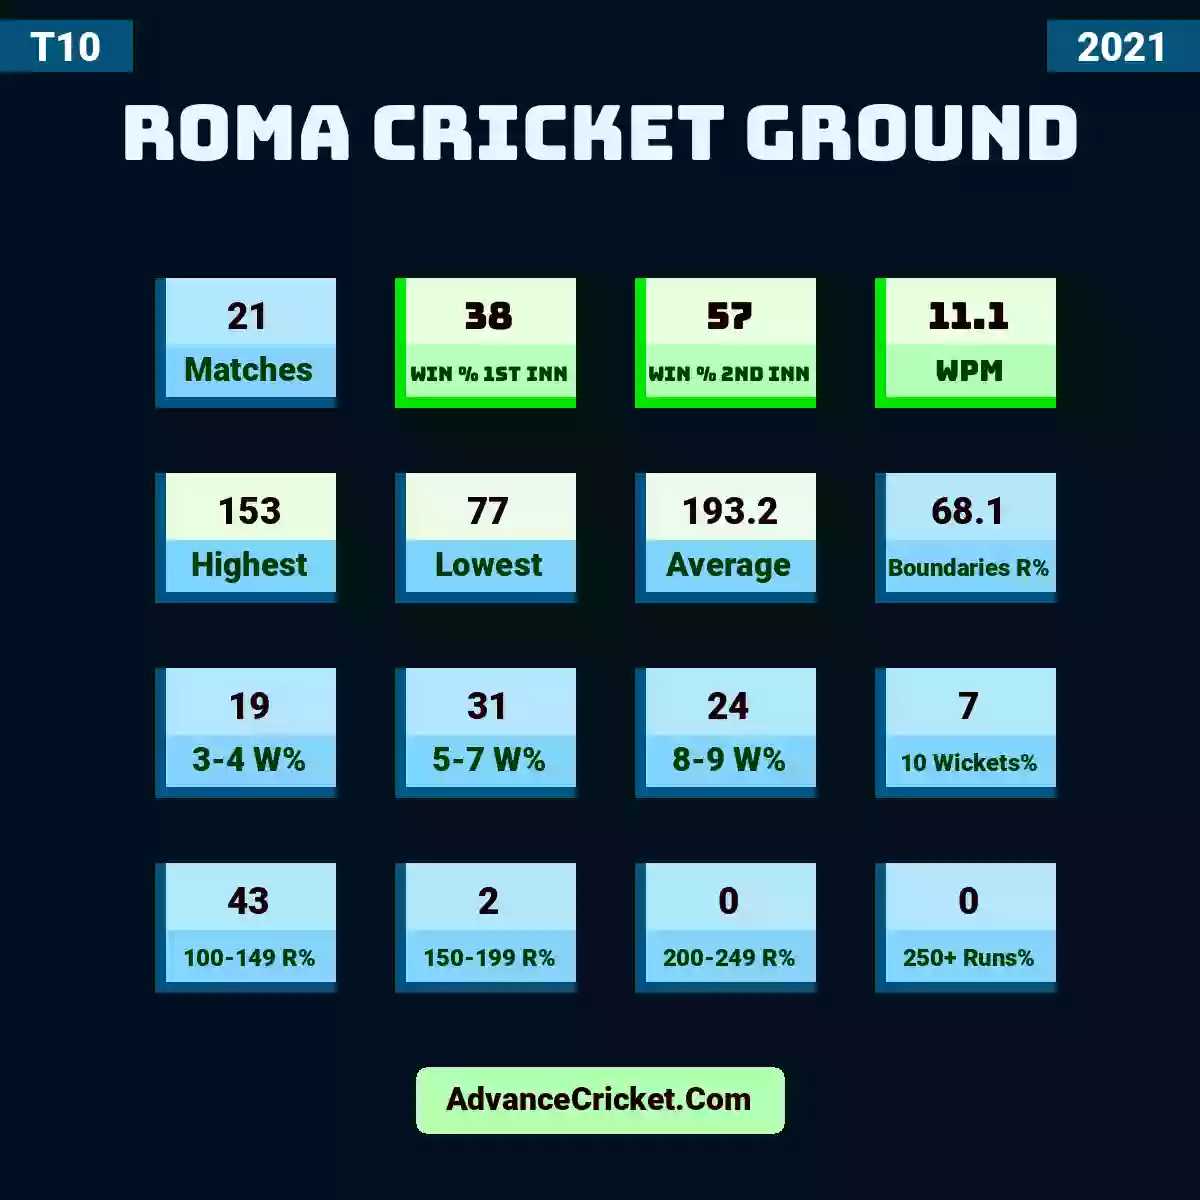 Image showing Roma Cricket Ground with Matches: 21, Win % 1st Inn: 38, Win % 2nd Inn: 57, WPM: 11.1, Highest: 153, Lowest: 77, Average: 193.2, Boundaries R%: 68.1, 3-4 W%: 19, 5-7 W%: 31, 8-9 W%: 24, 10 Wickets%: 7, 100-149 R%: 43, 150-199 R%: 2, 200-249 R%: 0, 250+ Runs%: 0.